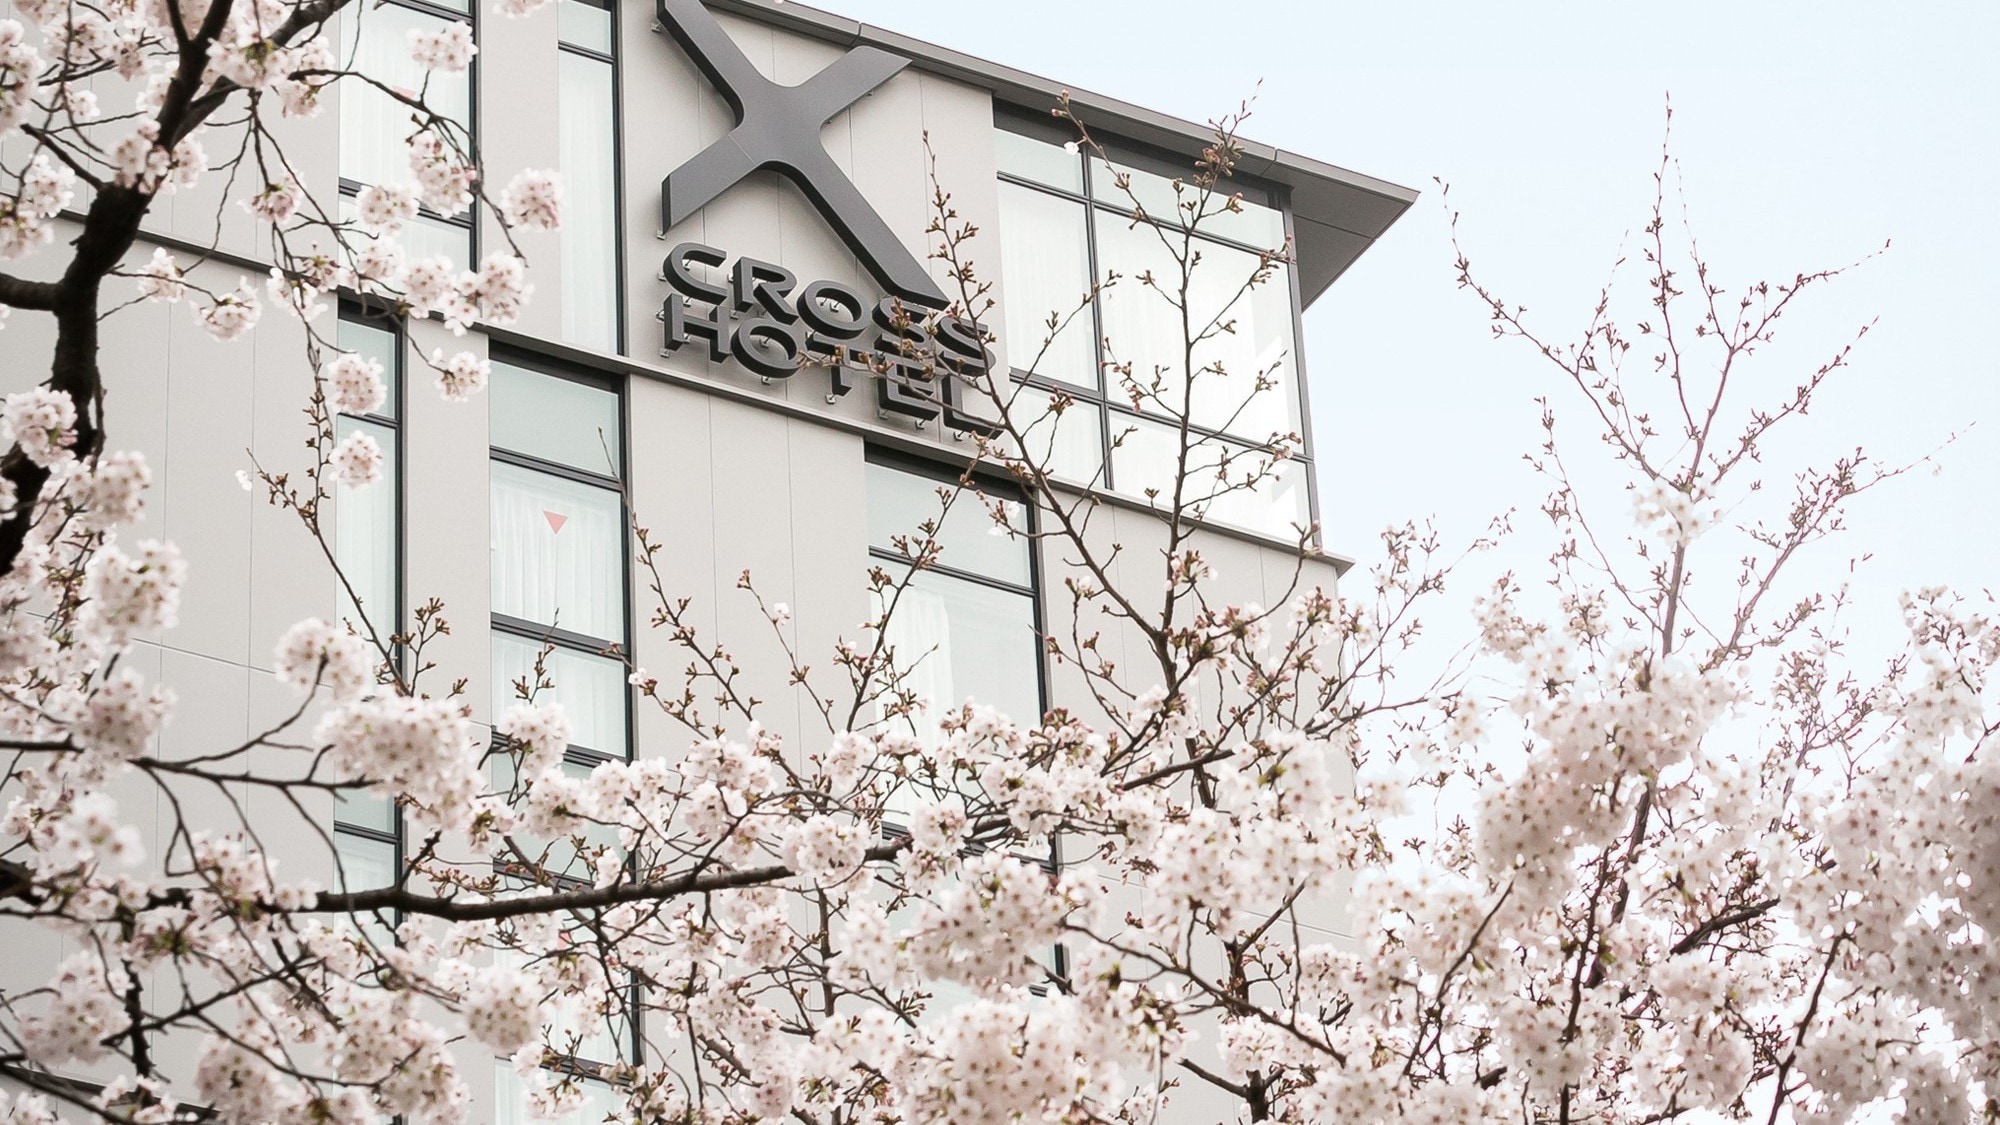 Appearance of the hotel during the cherry blossom season